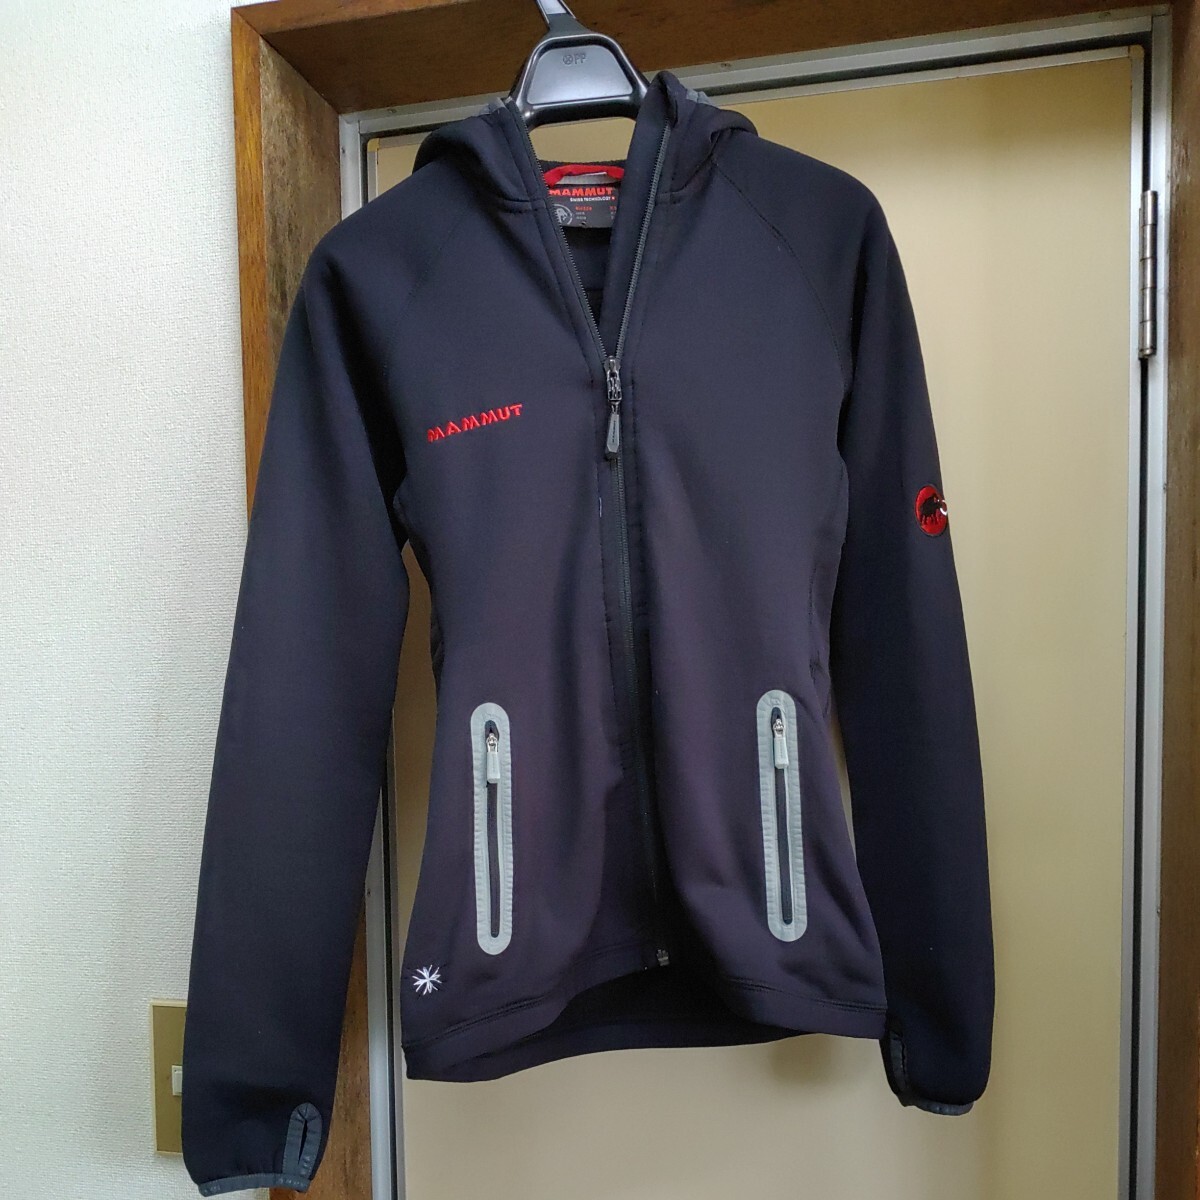  Mammut jersey jacket lady's outer outdoor leisure sport small size S size mammut 0514-D1-SA4